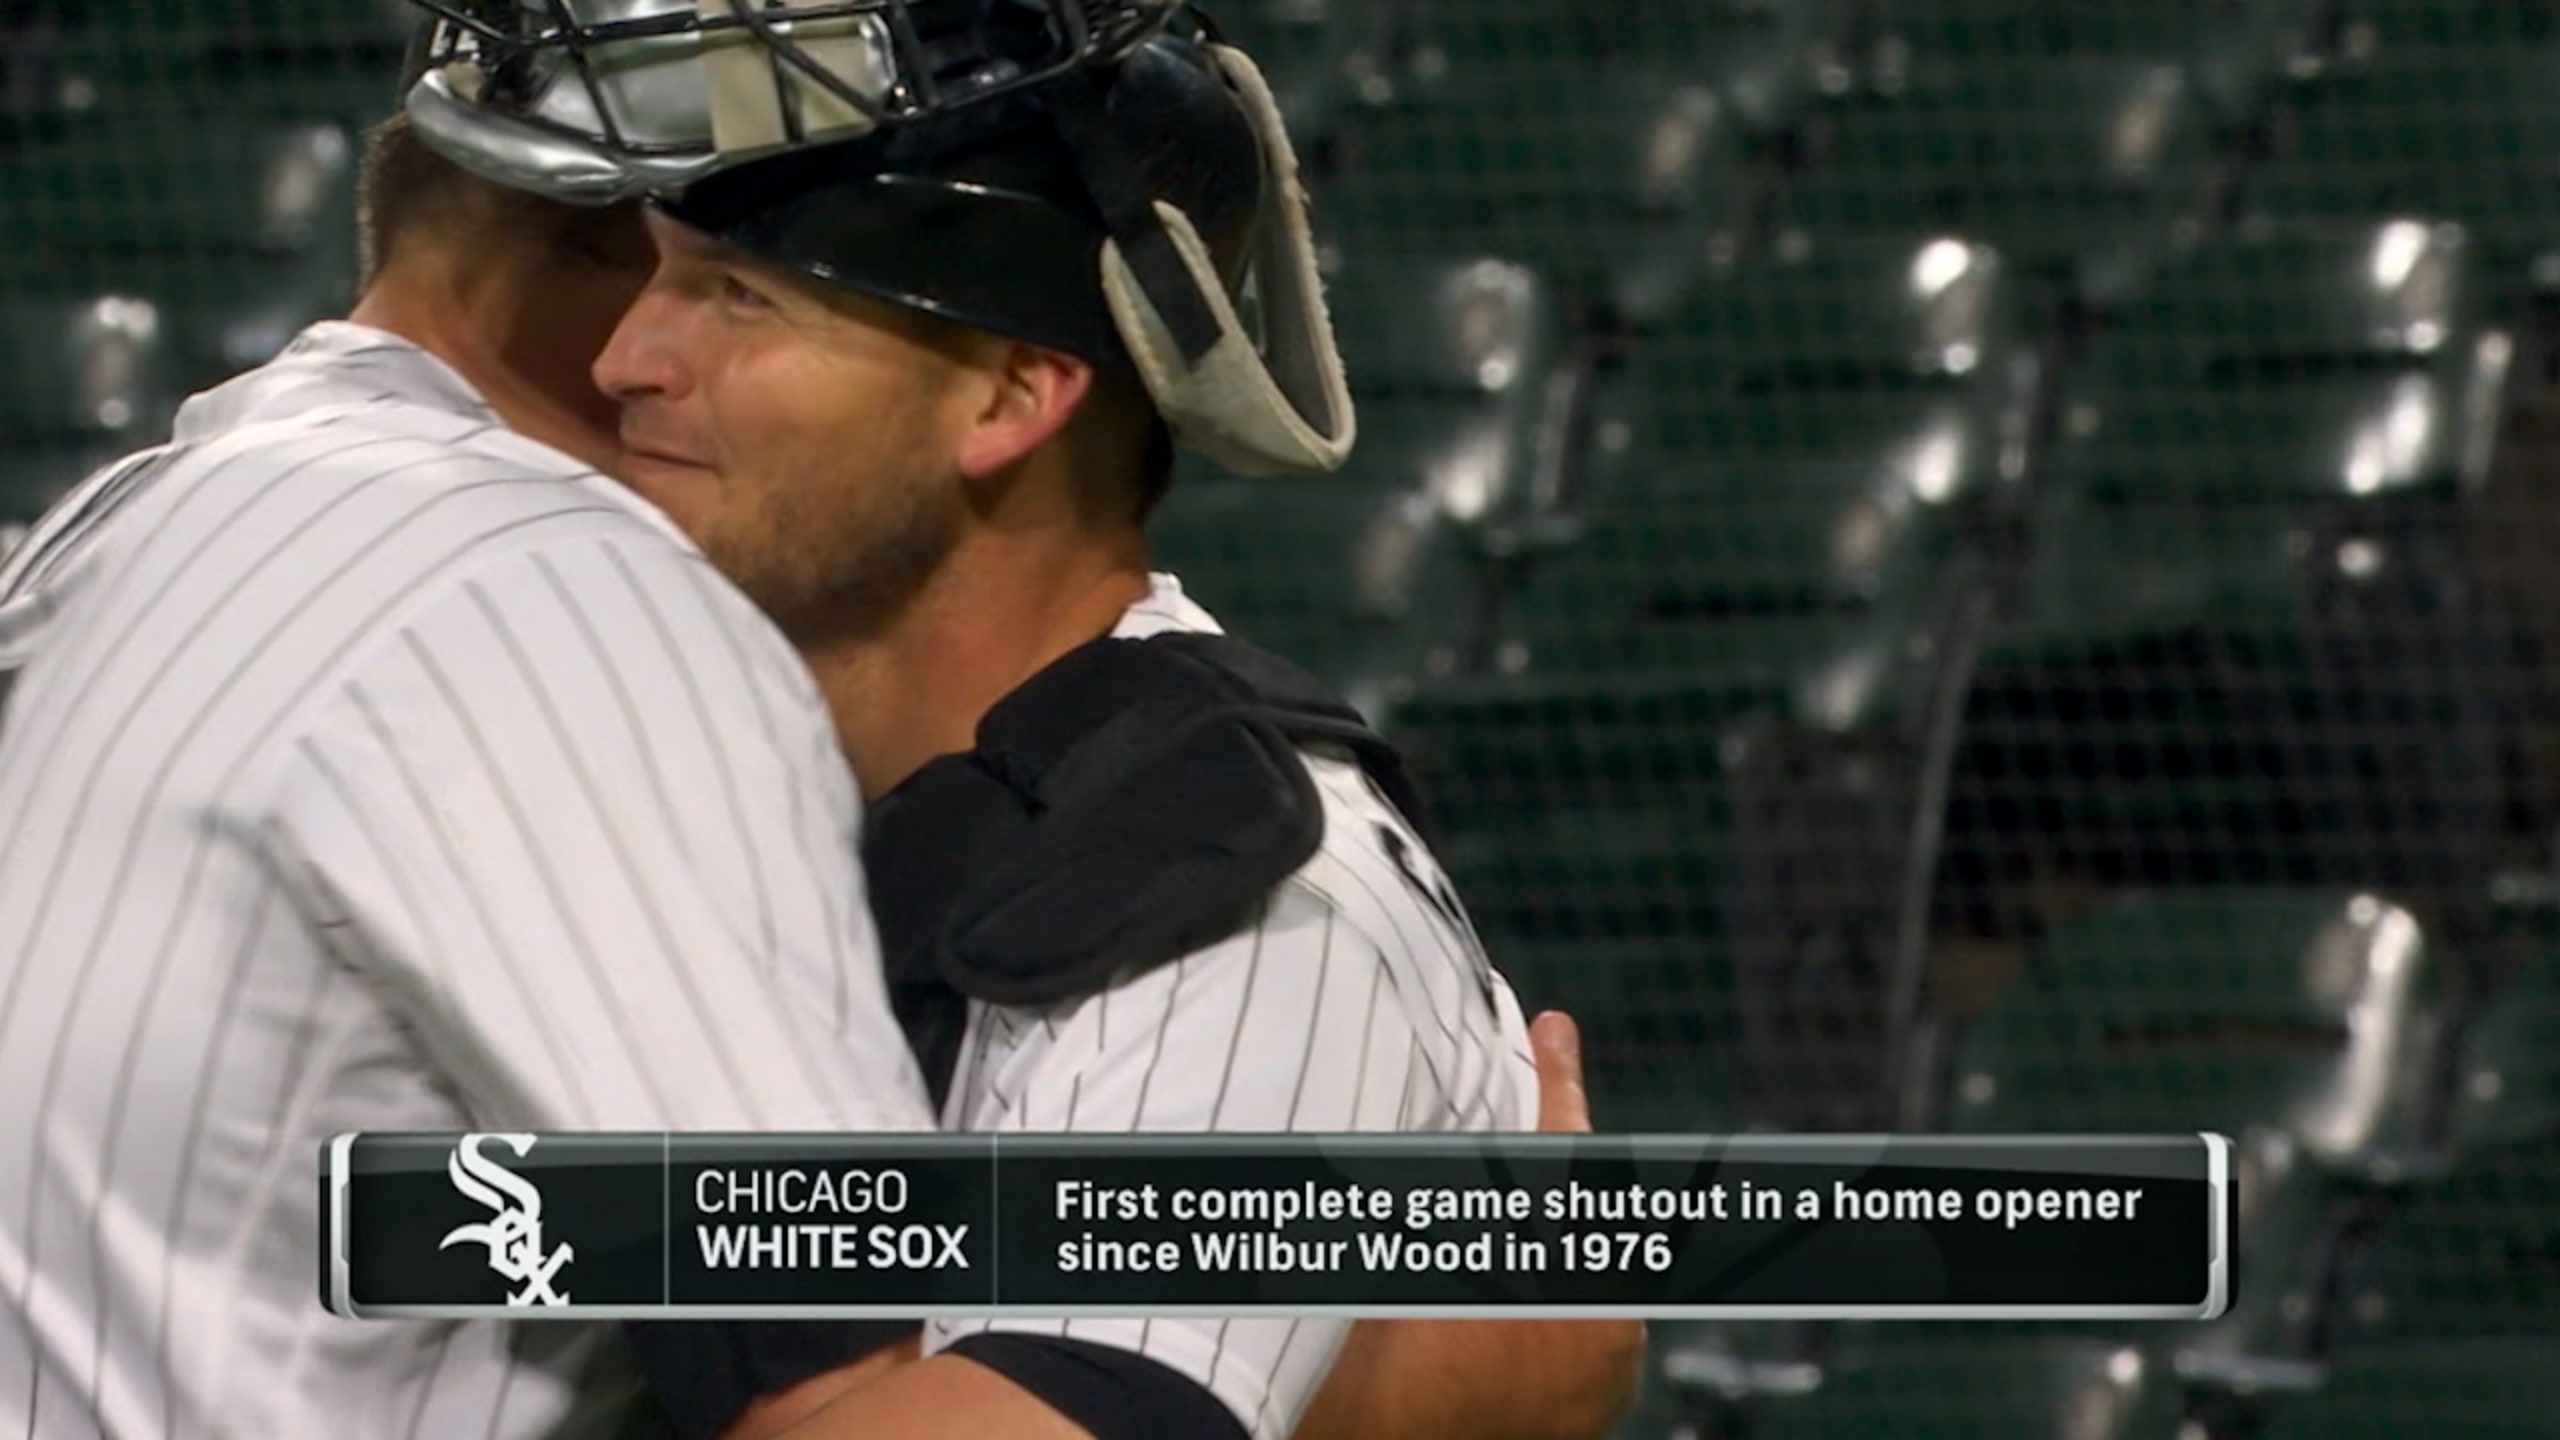 White Sox Talk on X: I had a marvelous time ruining everything